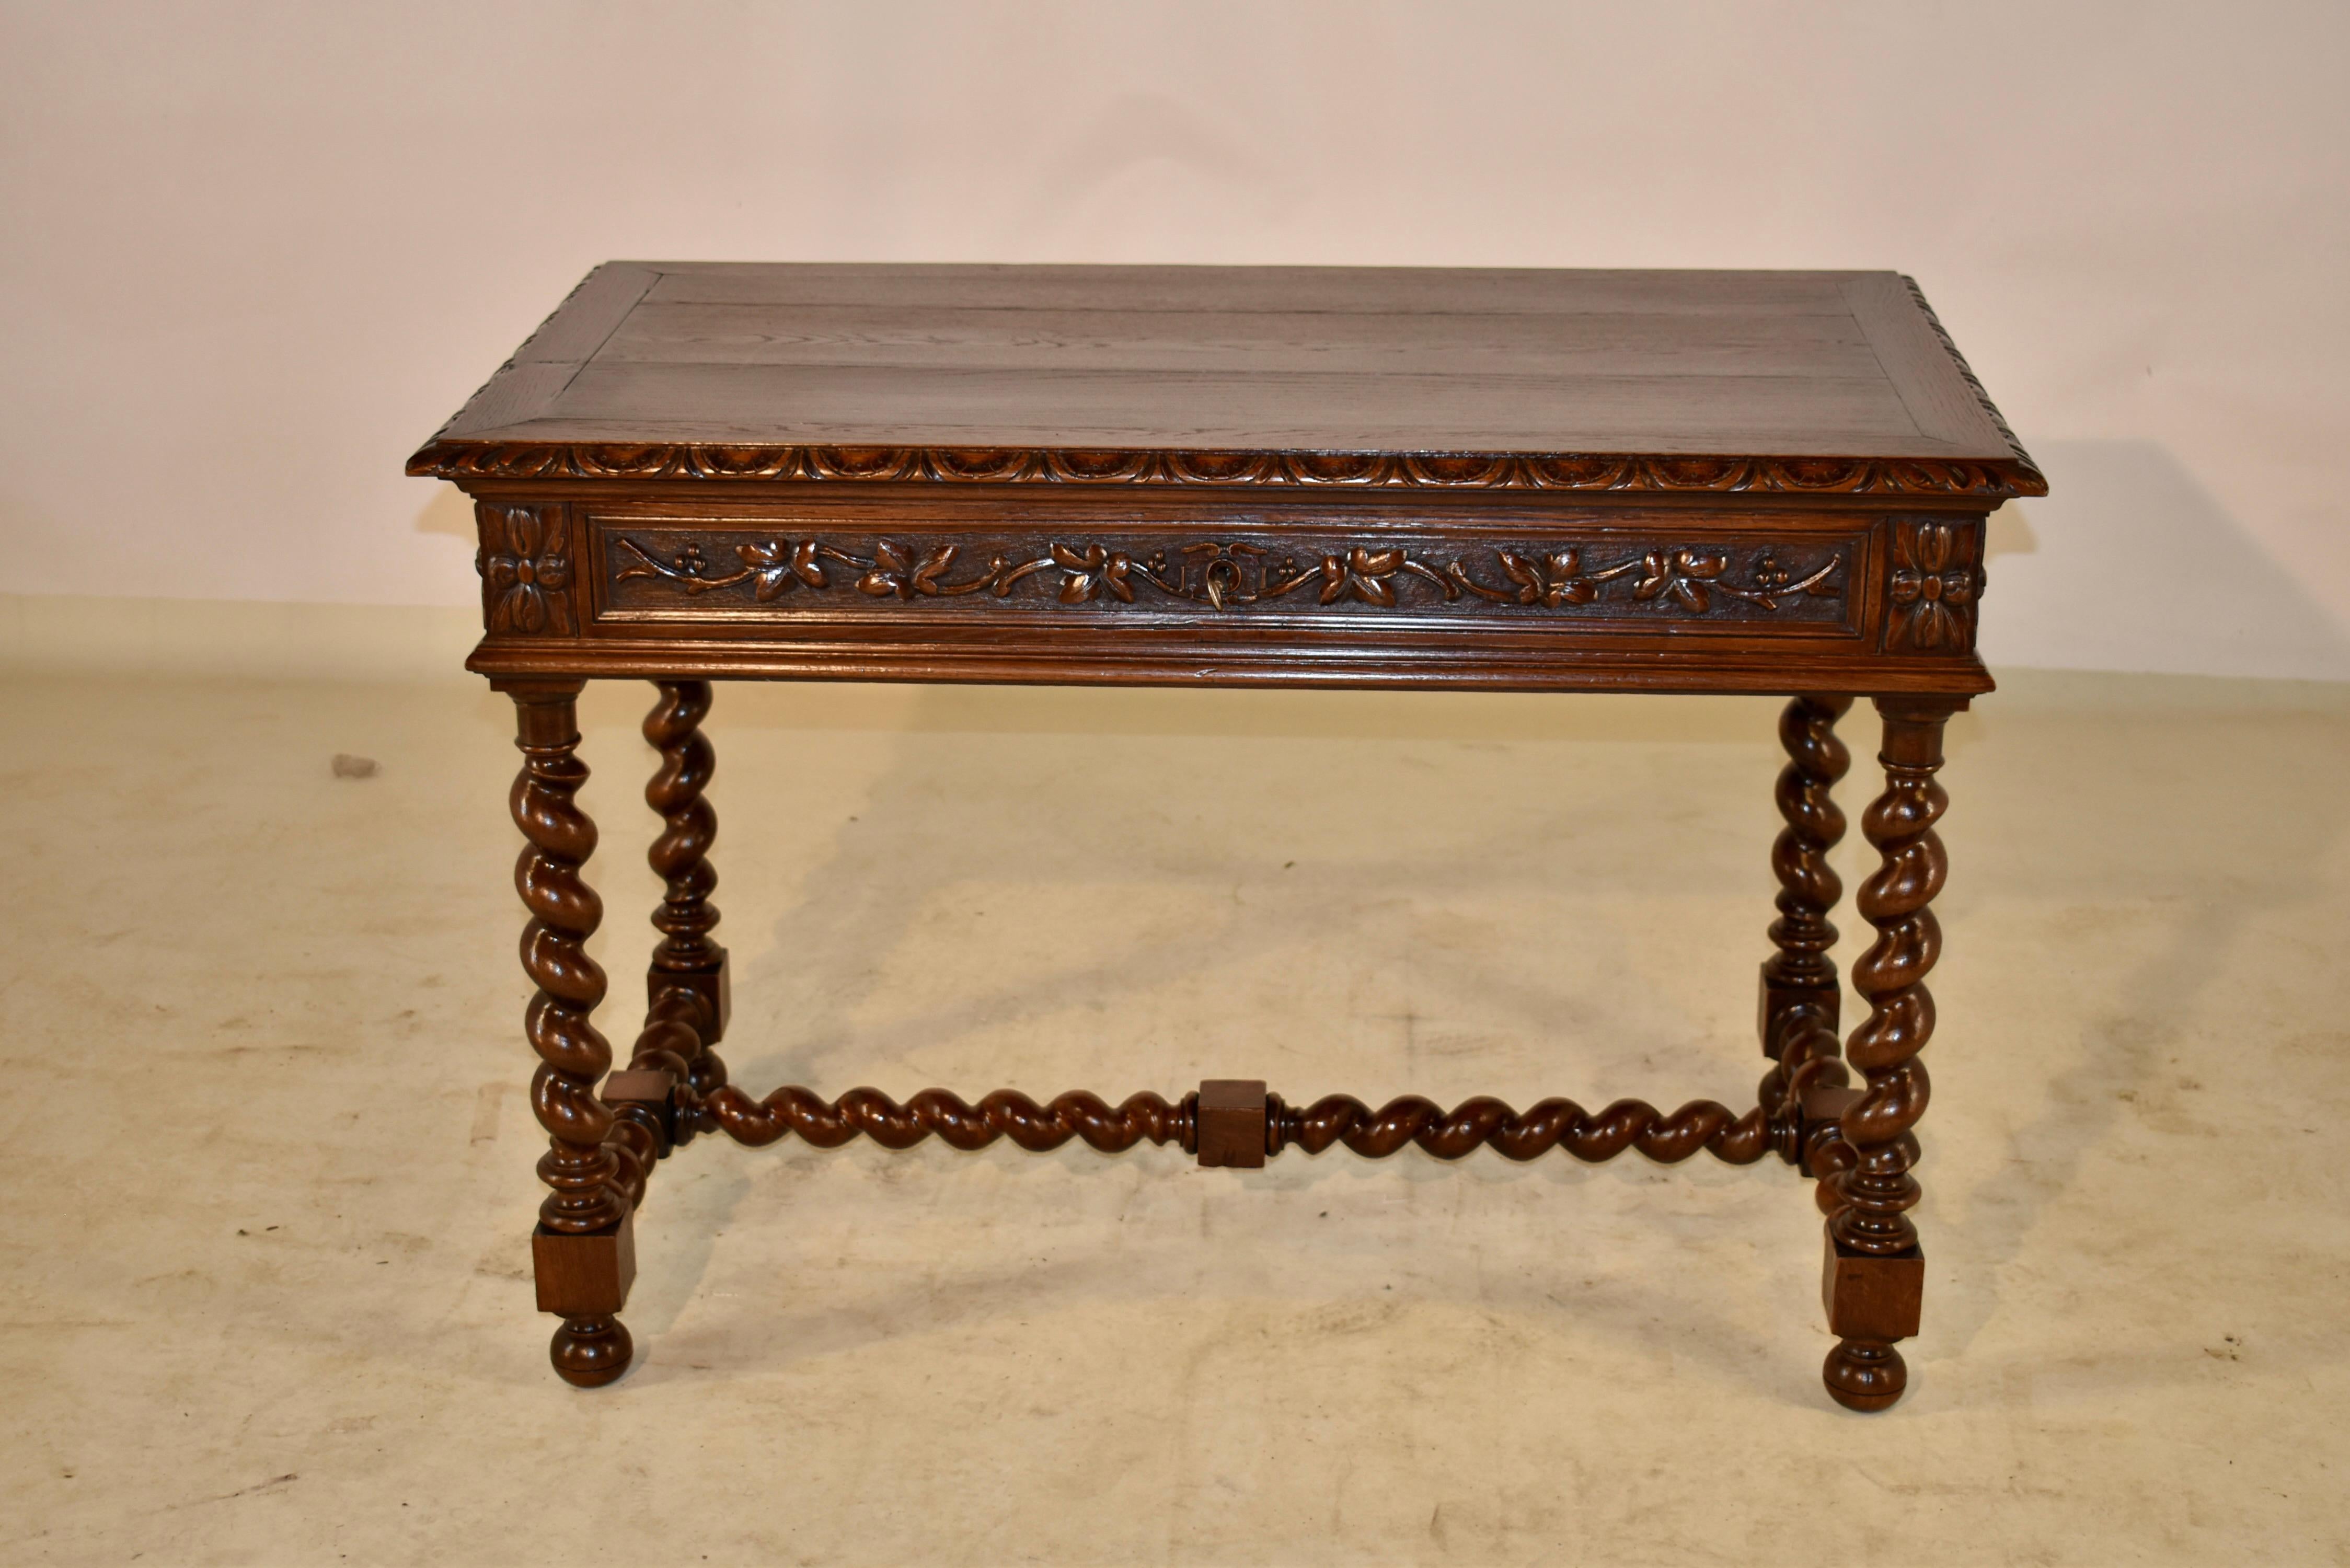 19th century oak writing or side table from France with a beveled and hand carved decorated edge around the top. The apron is hand raised paneled on all four sides , and has a single drawer in the front with wonderful hand carved leaves. The